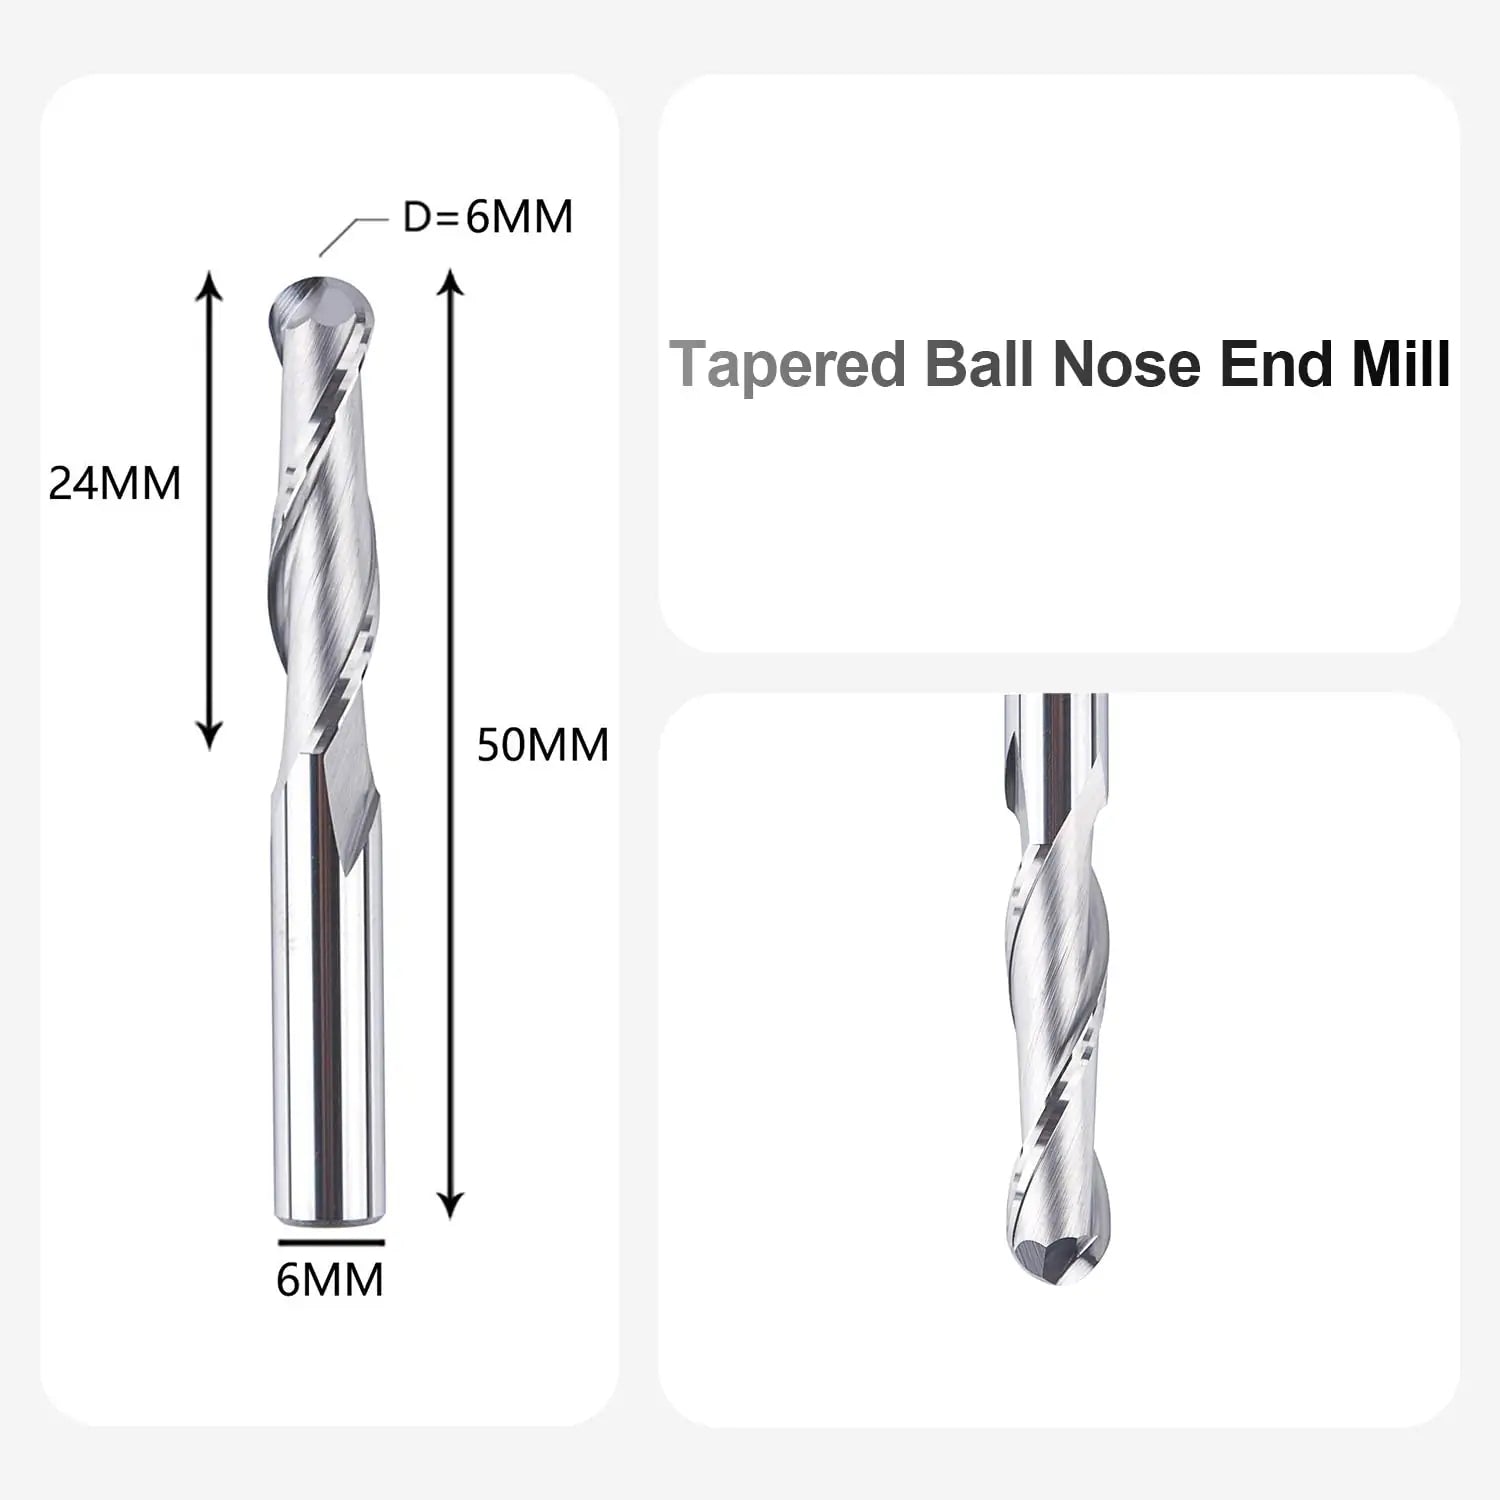 SpeTool EU Ball End Mill 6 mm Cutting Diameter 6 mm Shank 24 mm Cutting Length Double Flute Router Bit Solid Carbide Milling Cutter for DIY Woodworking Carving Engraving